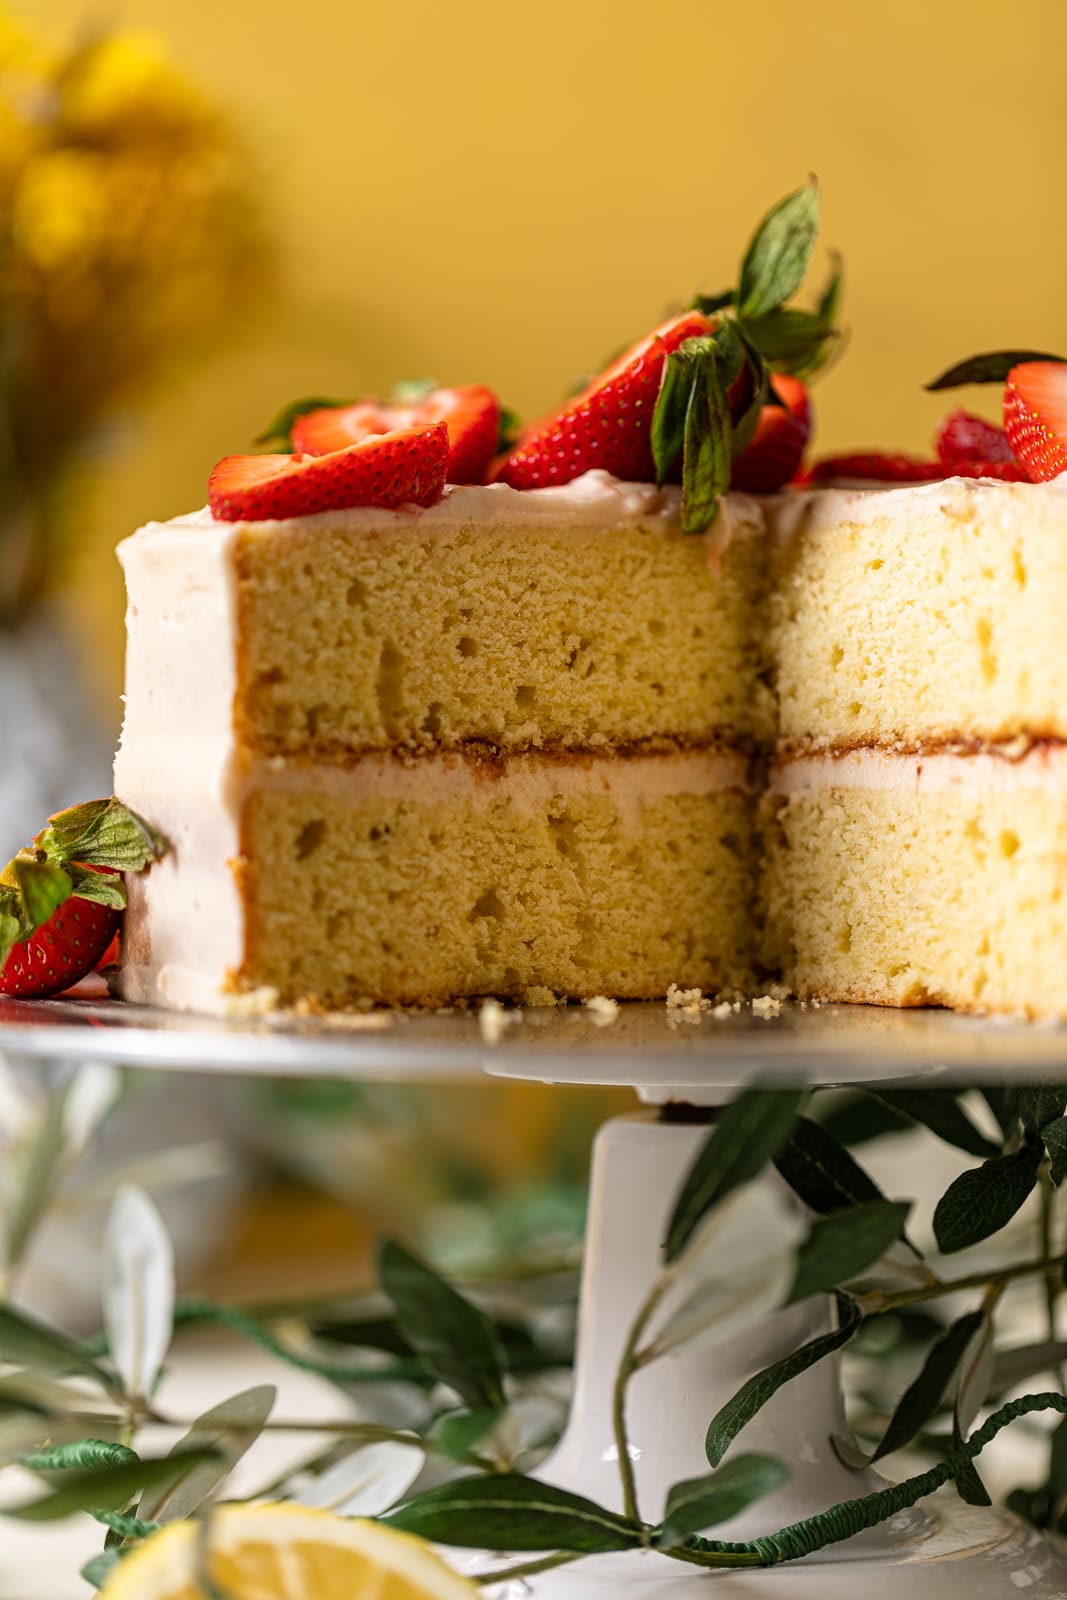 Closeup of a Lemon Strawberry Layer Cake that is missing a slice